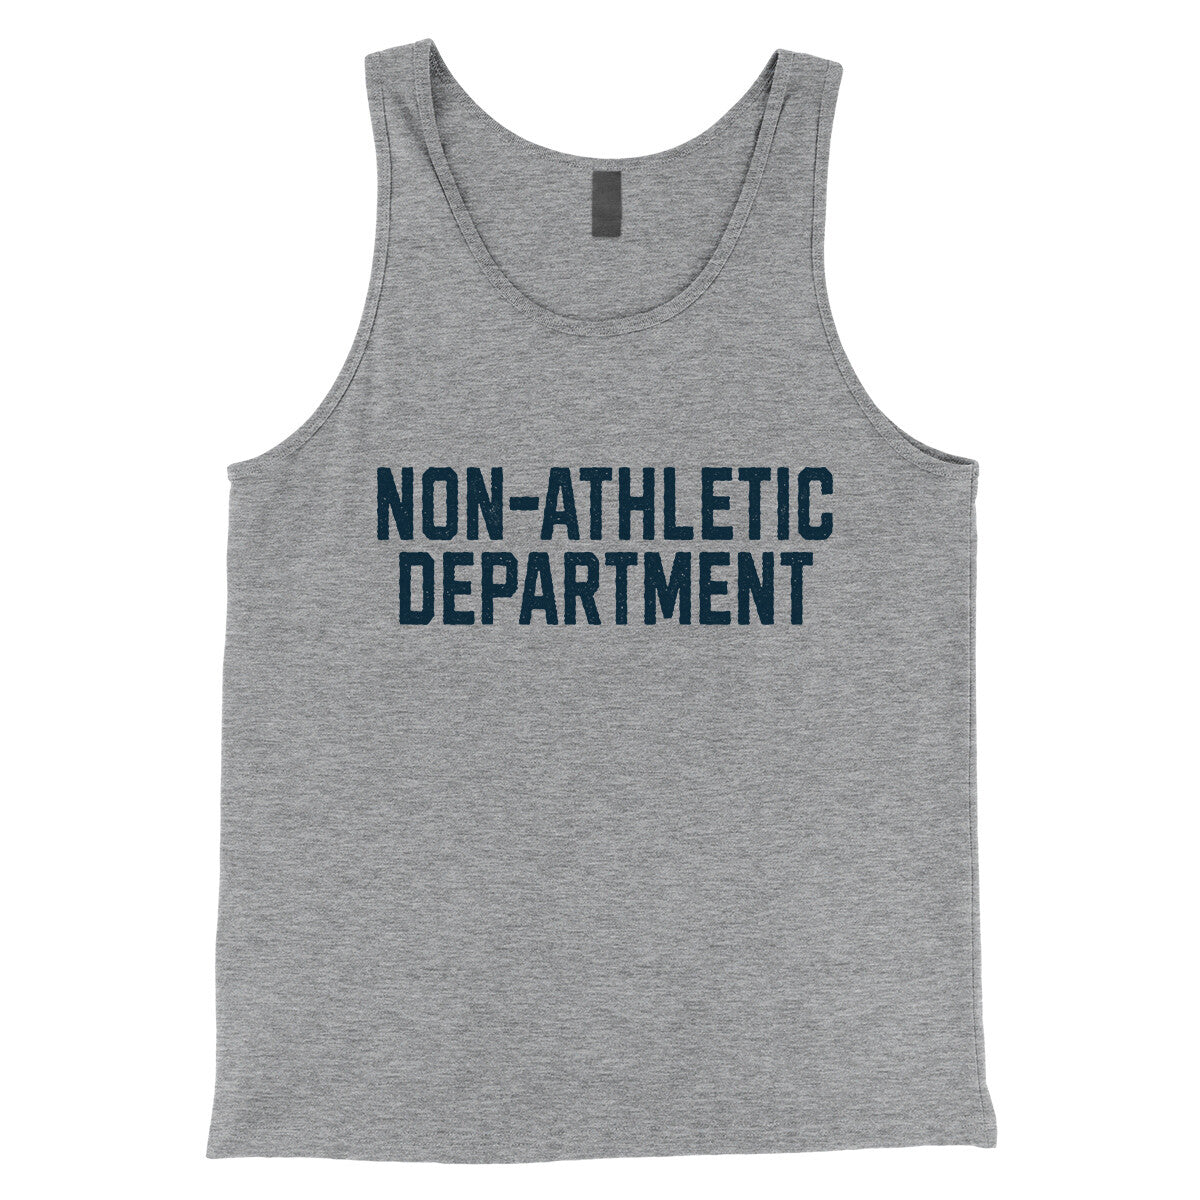 Non-Athletic Department in Athletic Heather Color